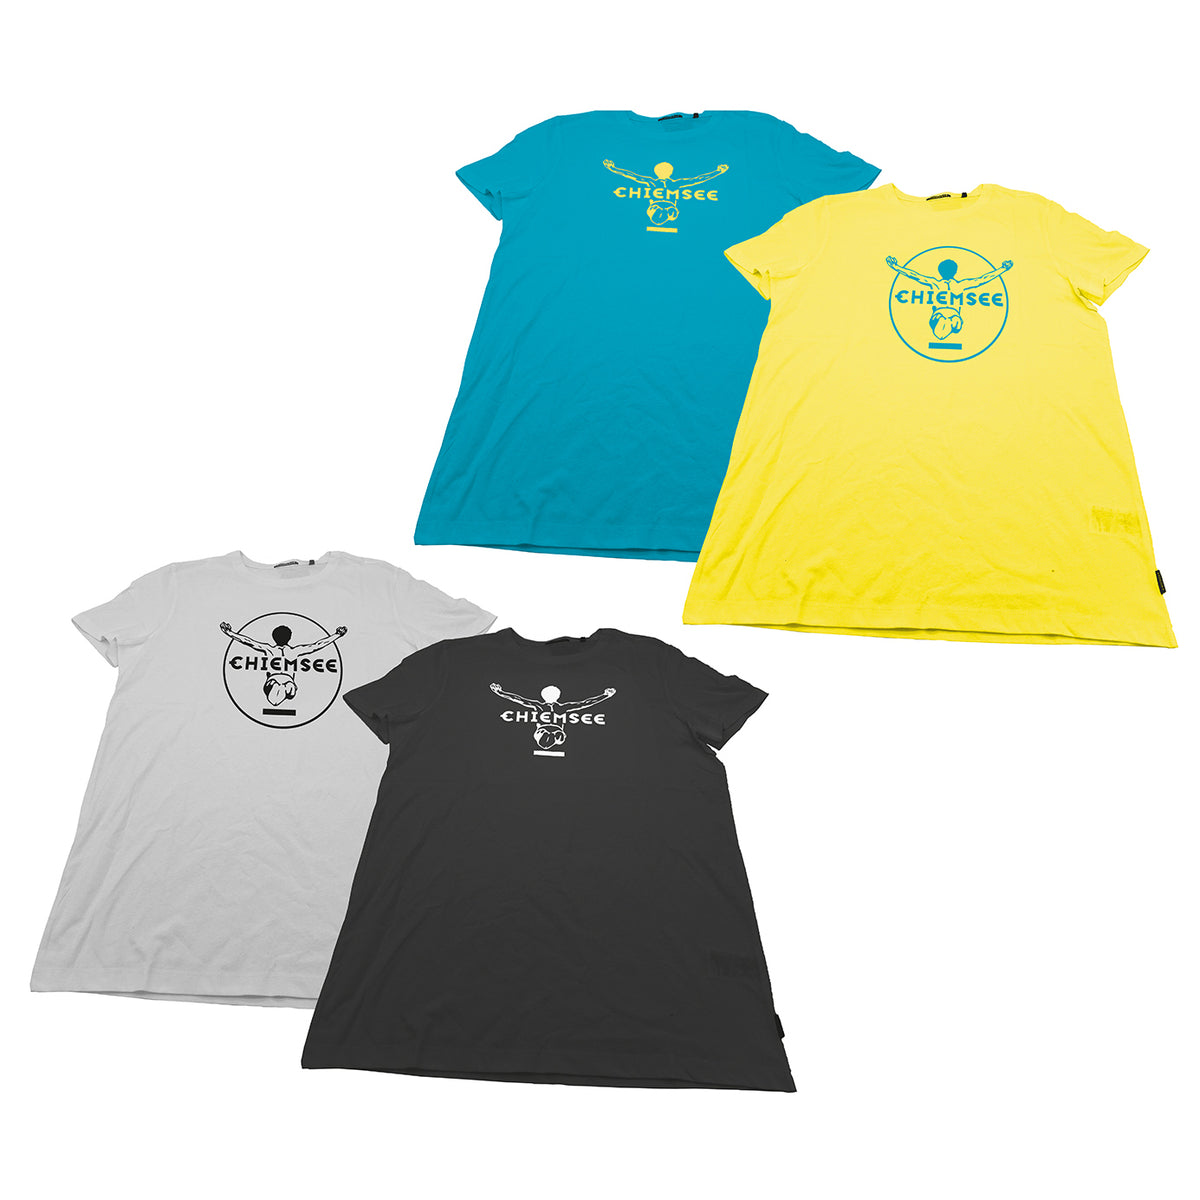 Chiemsee - T-Shirt - 2er Pack